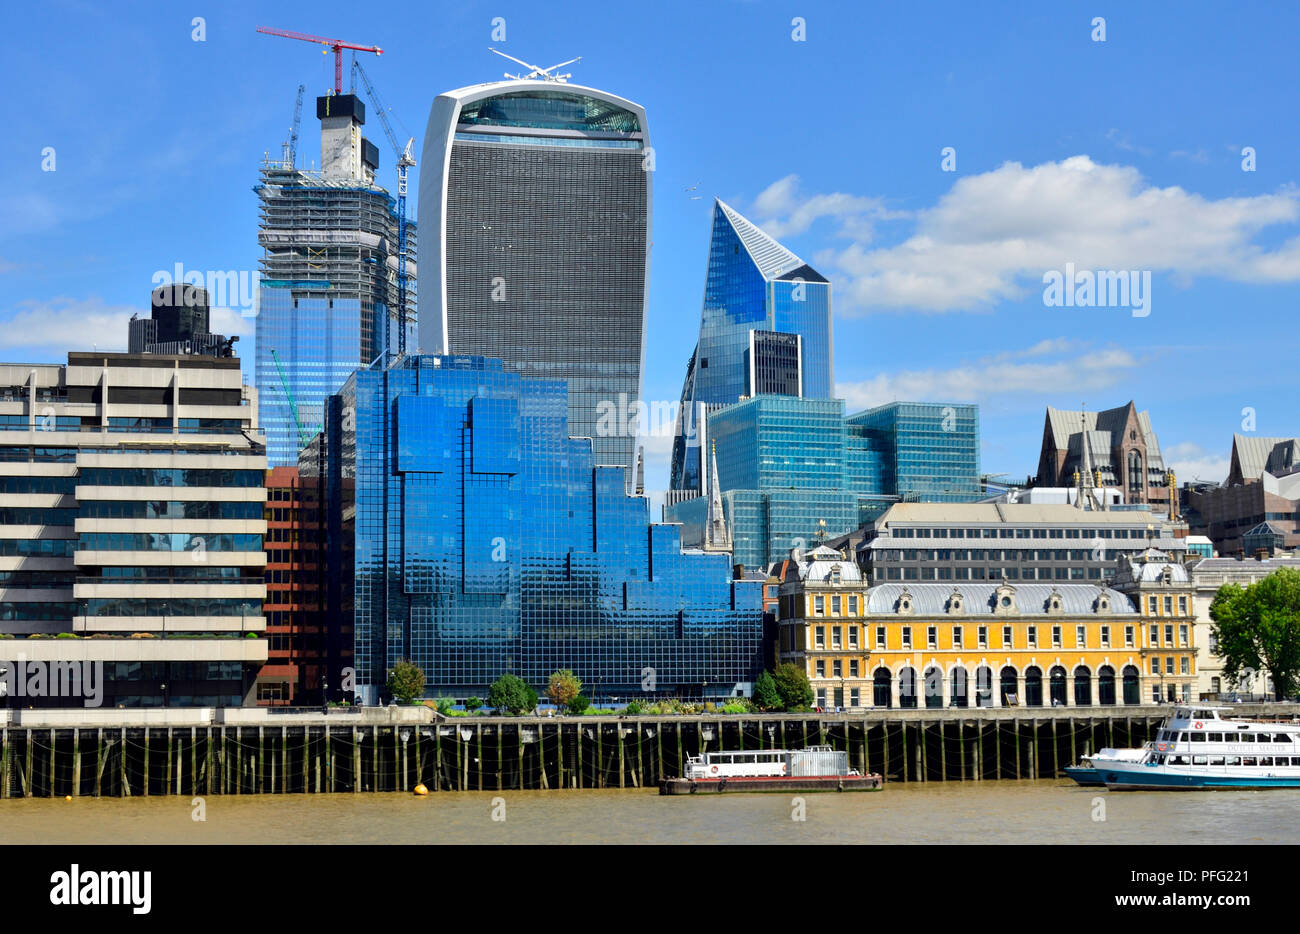 London, England, UK. Walkie Talkie building (20 Fenchurch Street) and others under construction in the city of London, seen from across the Thams Stock Photo